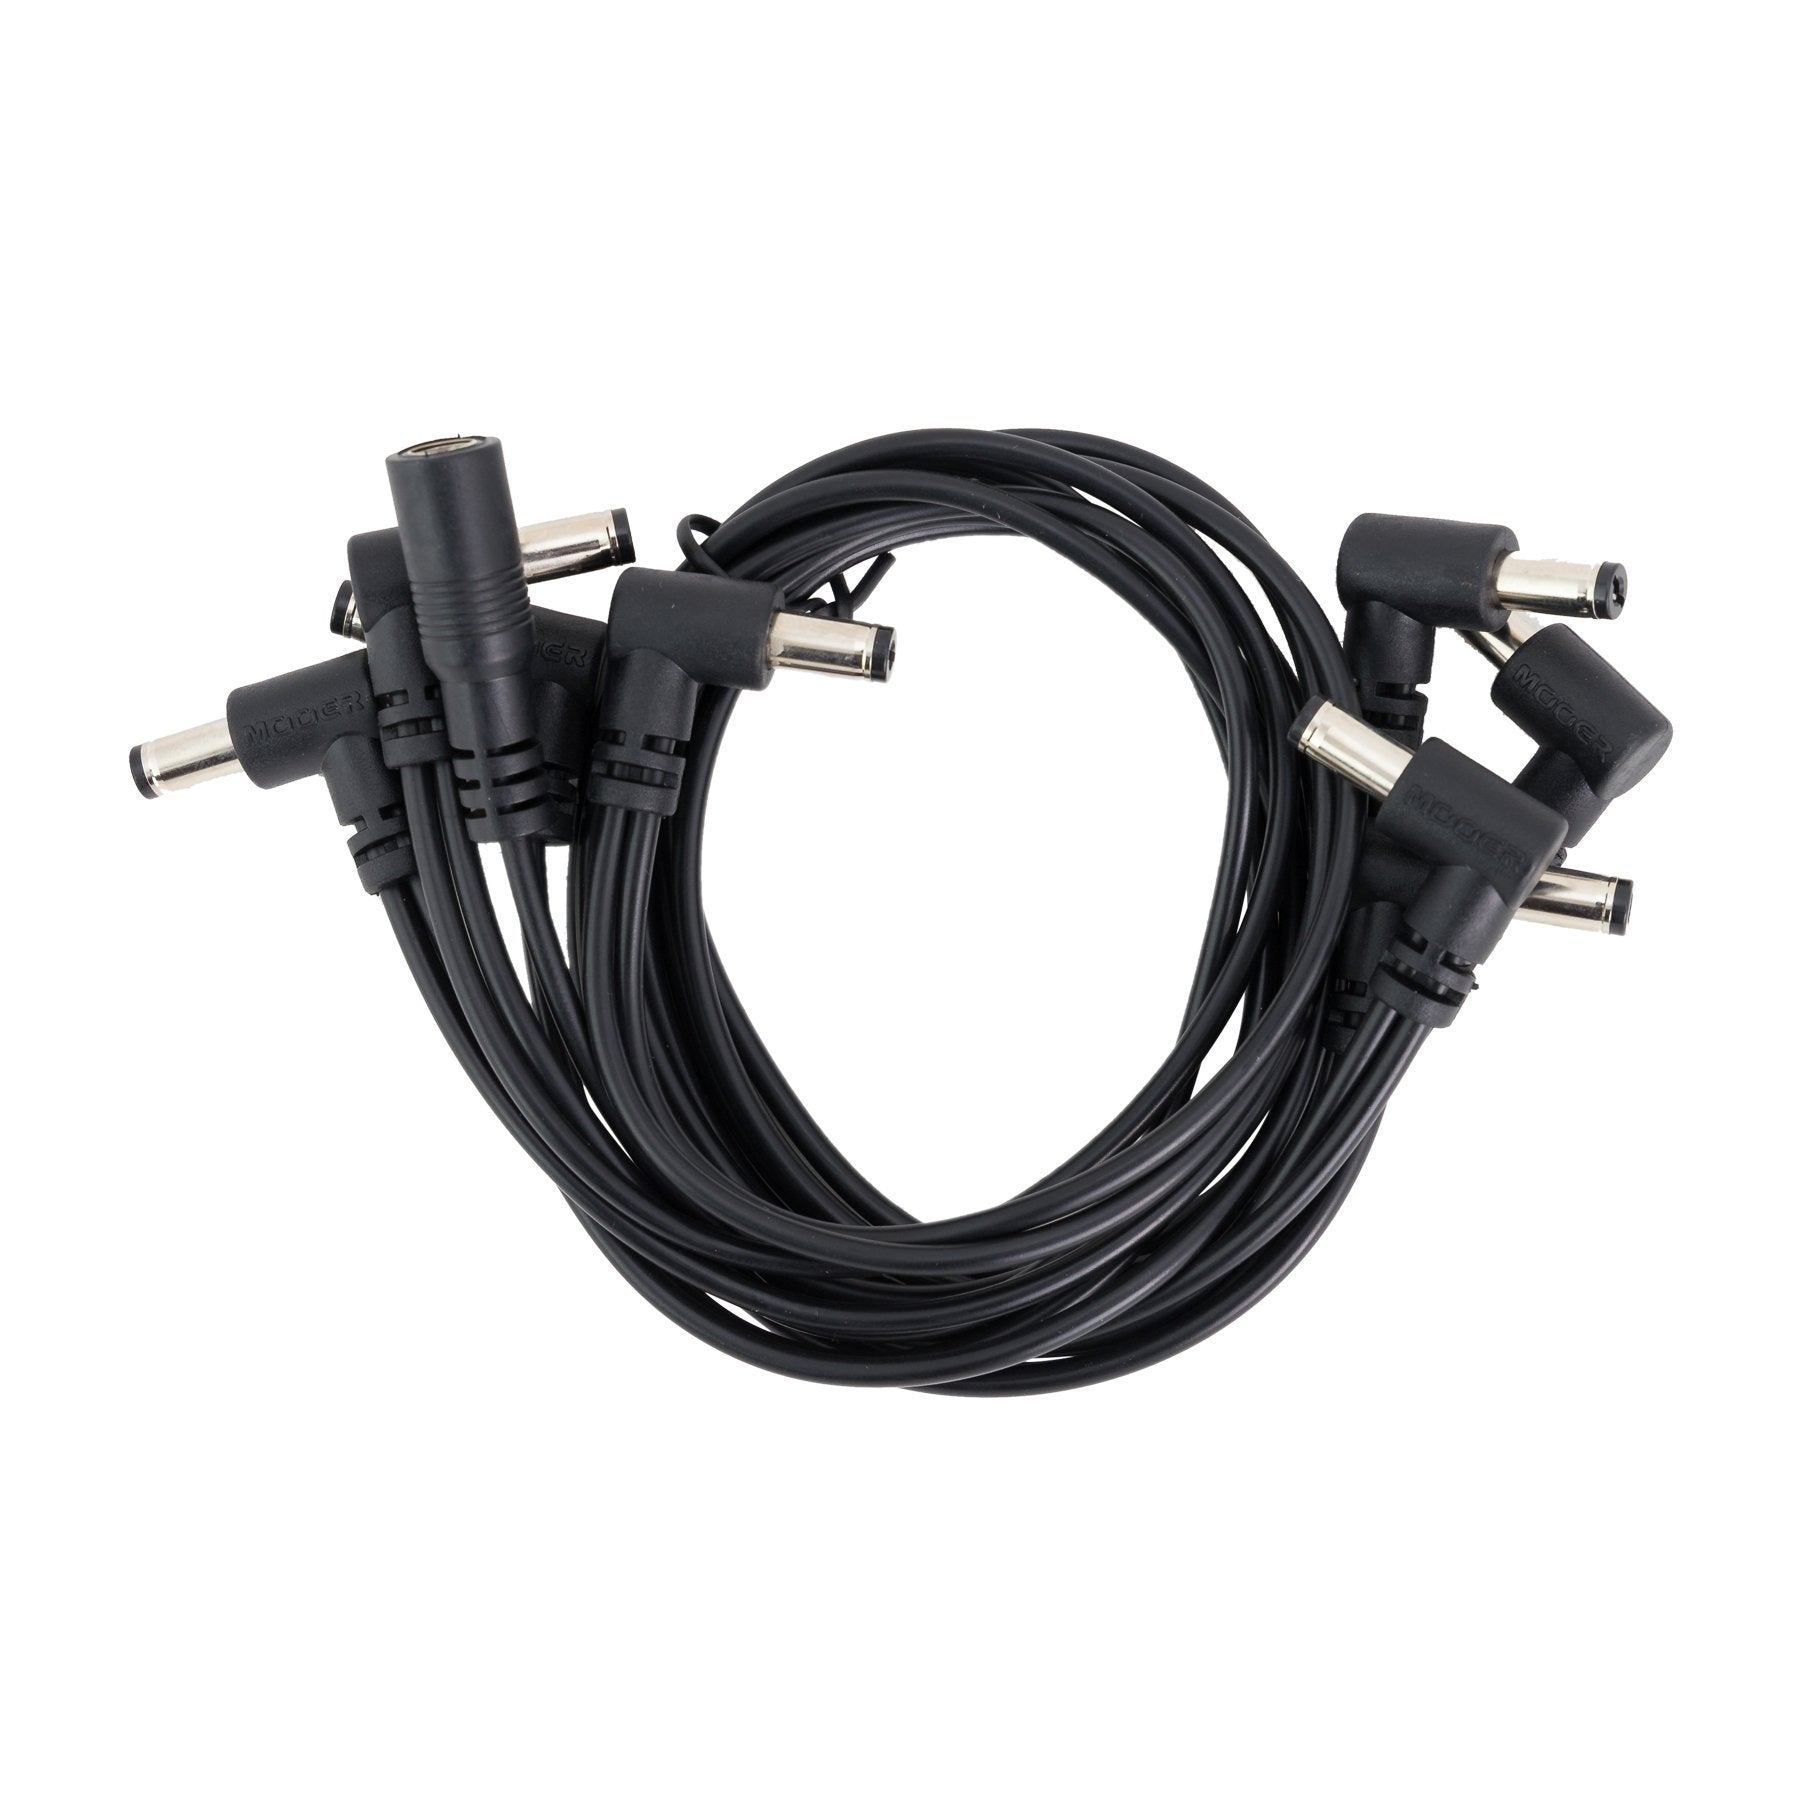 Mooer 8-Plug DC Daisy Chain Pedal Power Cable (Right-Angle Plugs)-MEP-PDC-8A